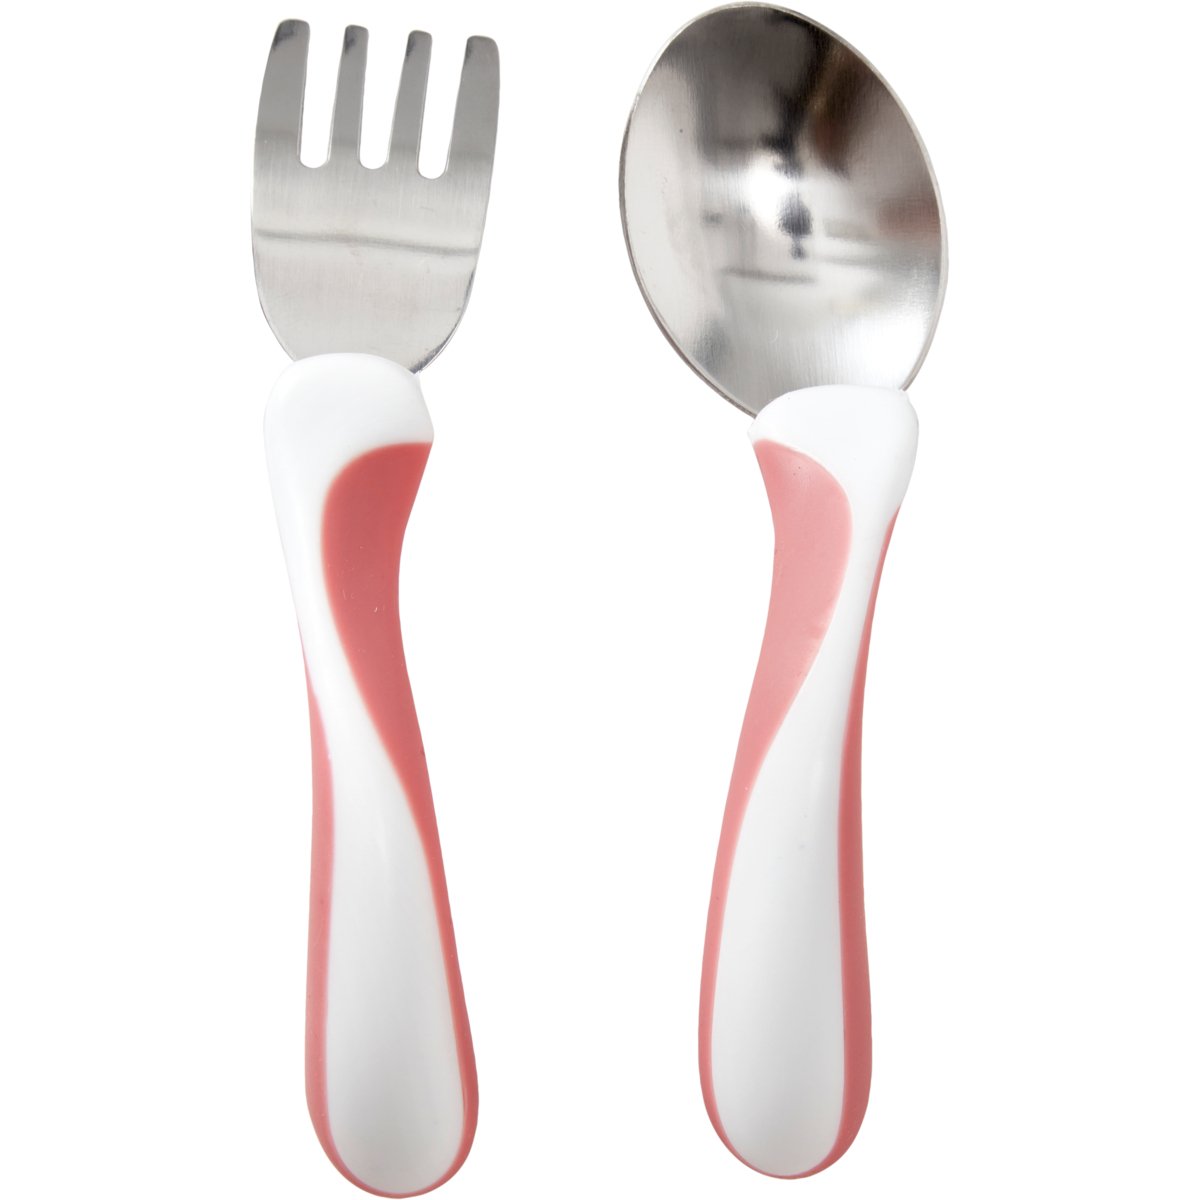 Bambino My first! FORK & SPOON cerise